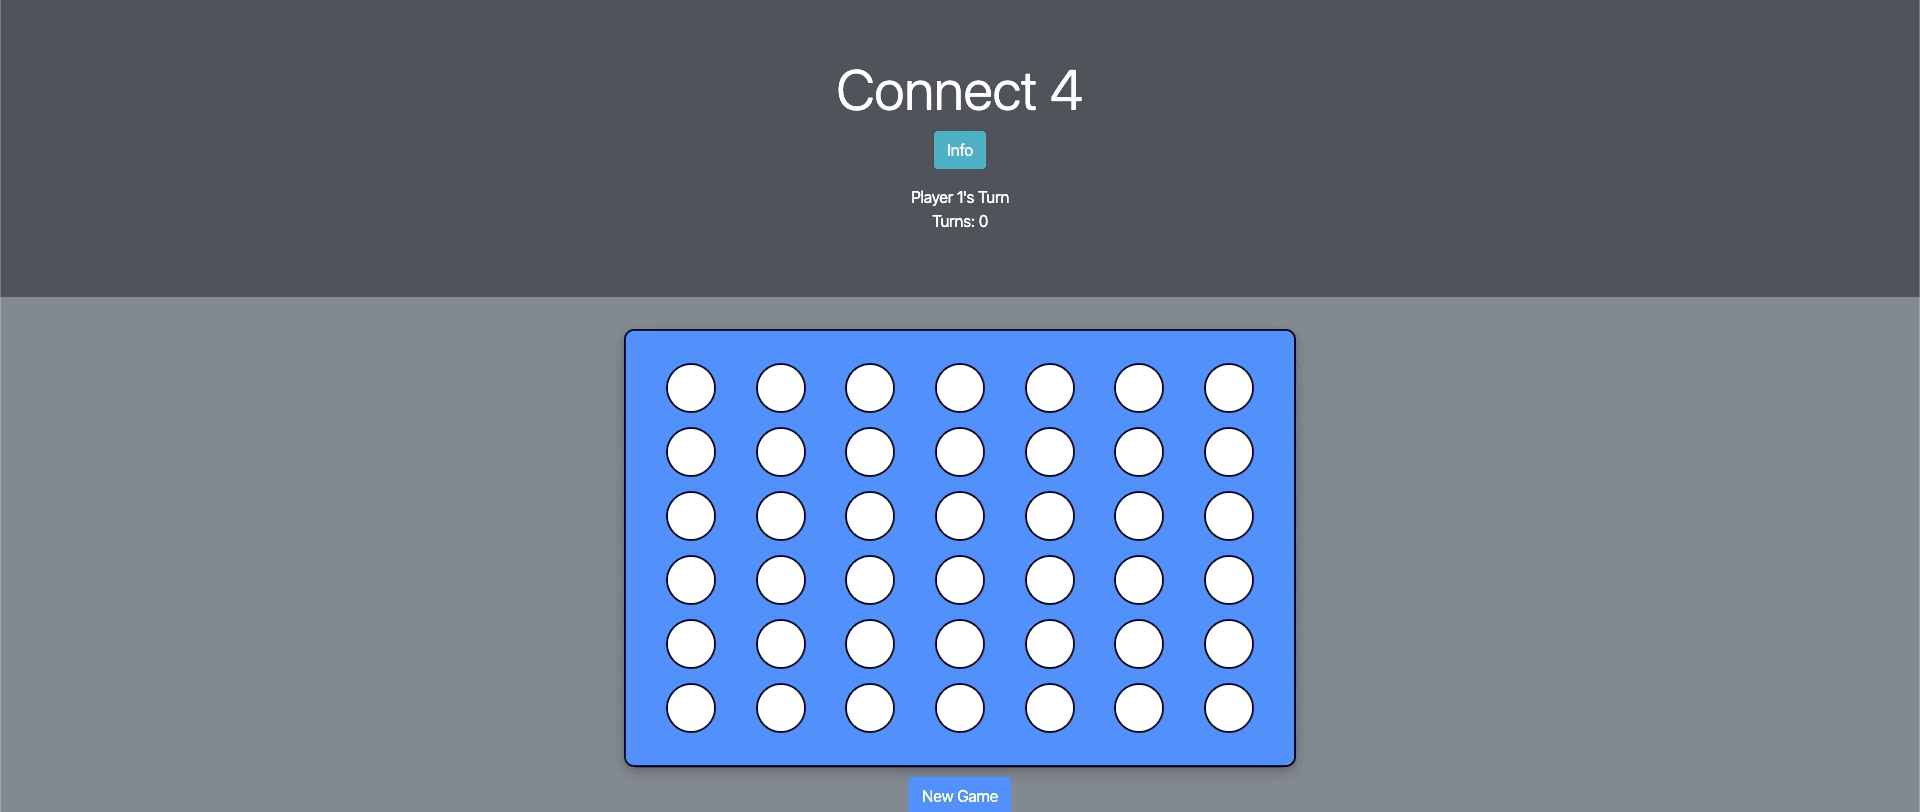 Connect 4 Demo